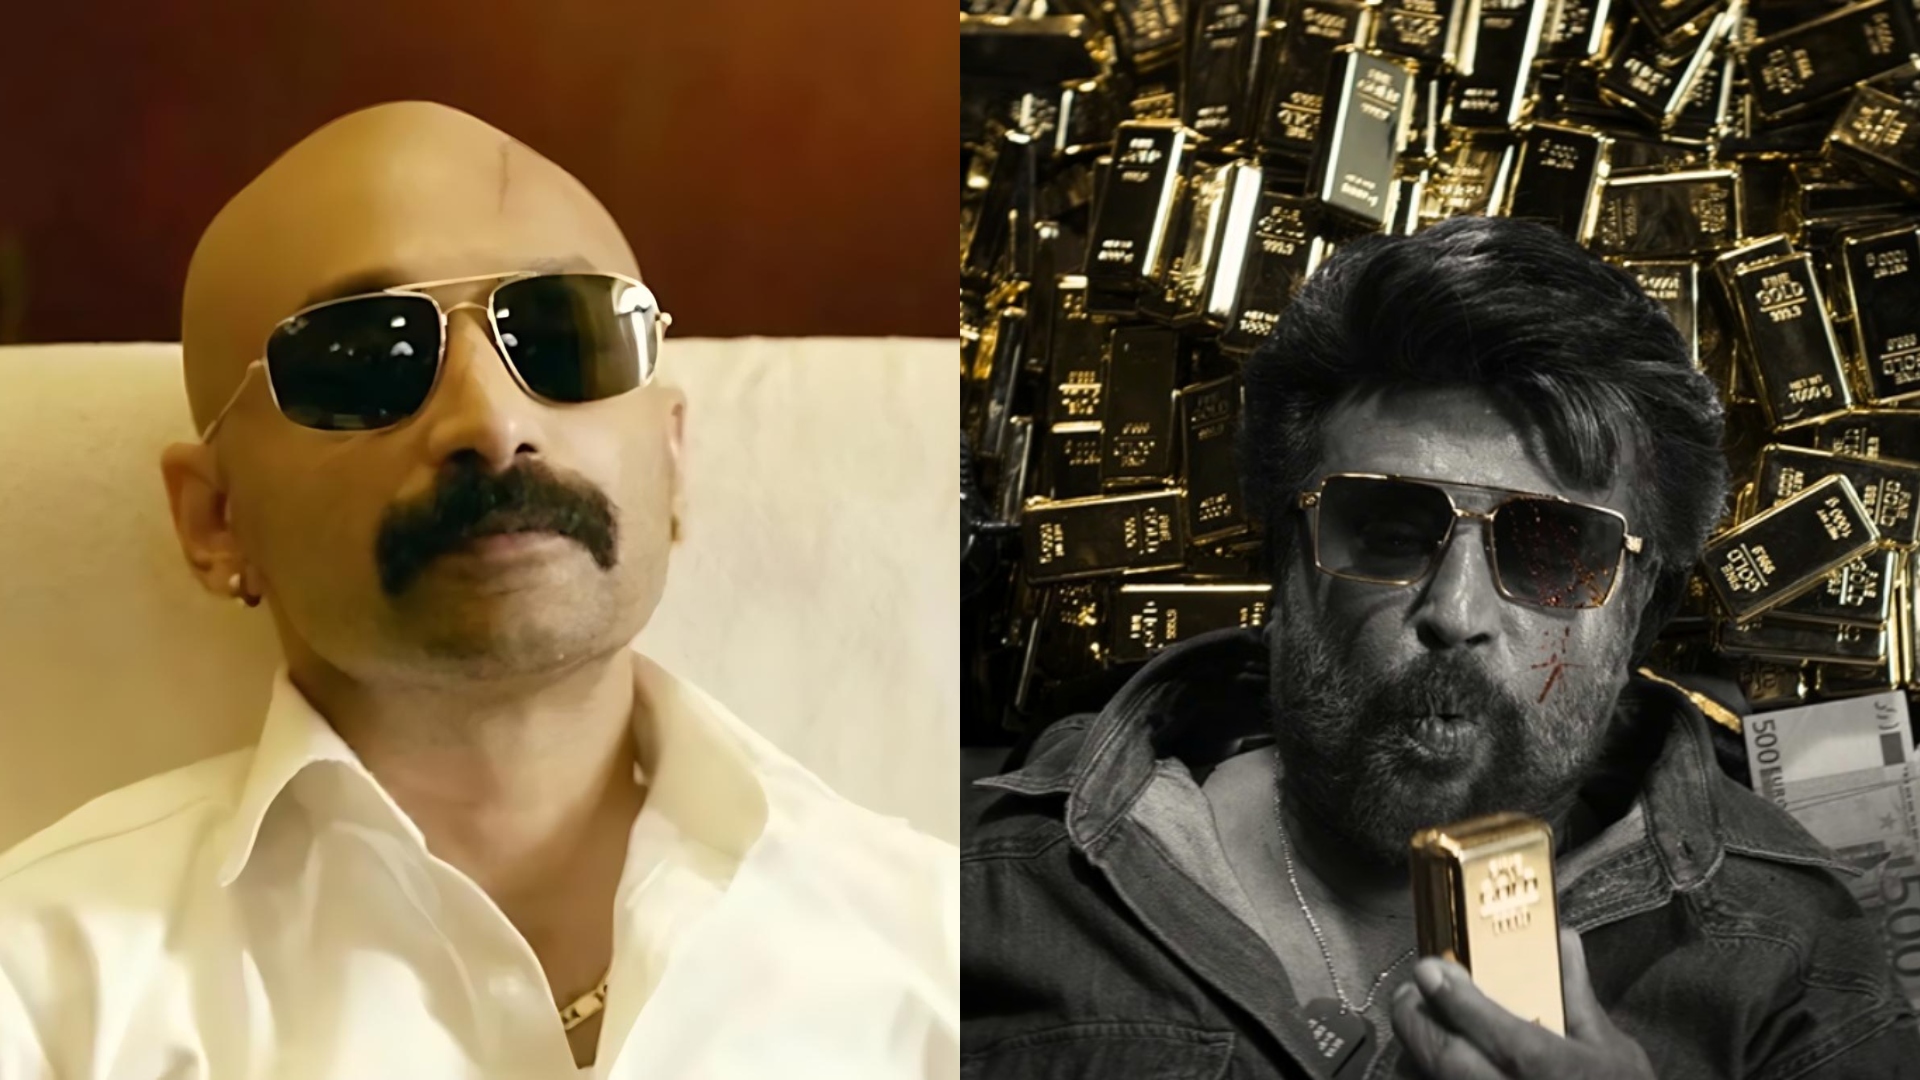 Fahadh Faasil Rejects Rajinikanth’s ‘Coolie’? All We Know